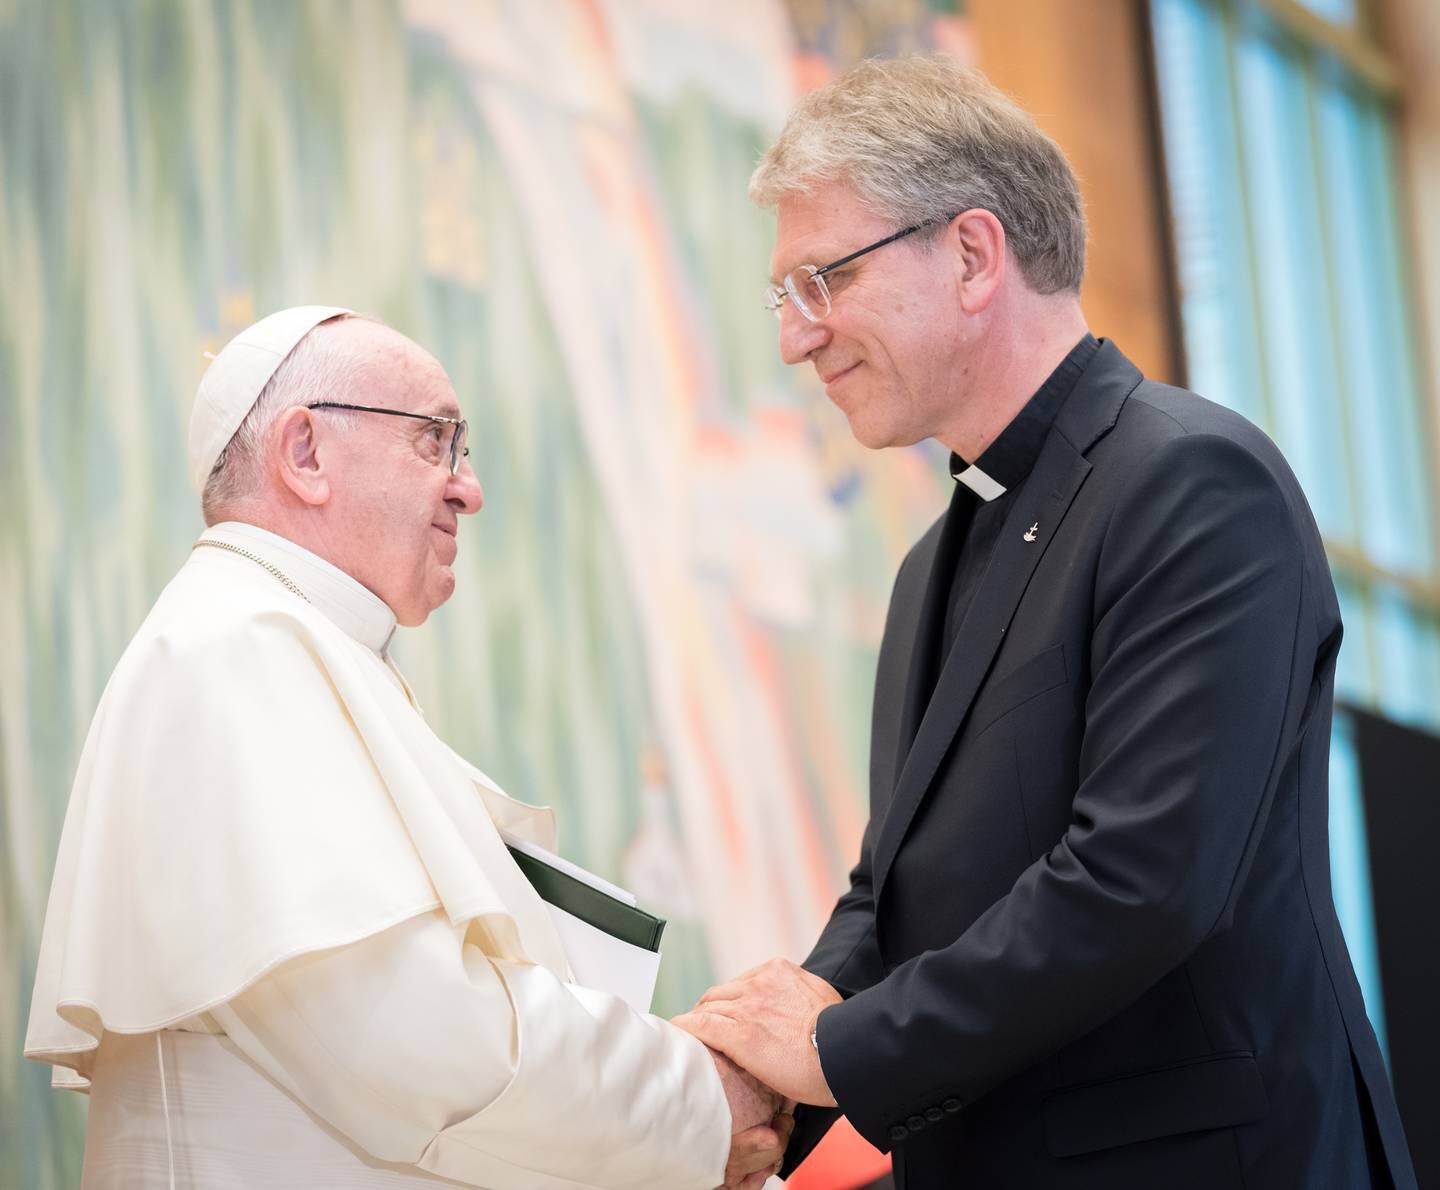 21 June 2018, Geneva, Switzerland: WCC general secretary Rev. Dr Olav Fykse Tveit and Pope Francis share a moment of mutual appreciation after Tveit has spoken at an Ecumenical Encounter between Pope Francis and the World Council of Churches on 21 June. On 21 June 2018, the World Council of Churches receives a visit from Pope Francis of the Roman Catholic Church. Held under the theme of “Ecumenical Pilgrimage - Walking, Praying and Working Together”, the landmark visit is a centrepiece of the ecumenical commemoration of the WCC's 70th anniversary. The visit is only the third by a pope, and the first time that such an occasion was dedicated to visiting the WCC.